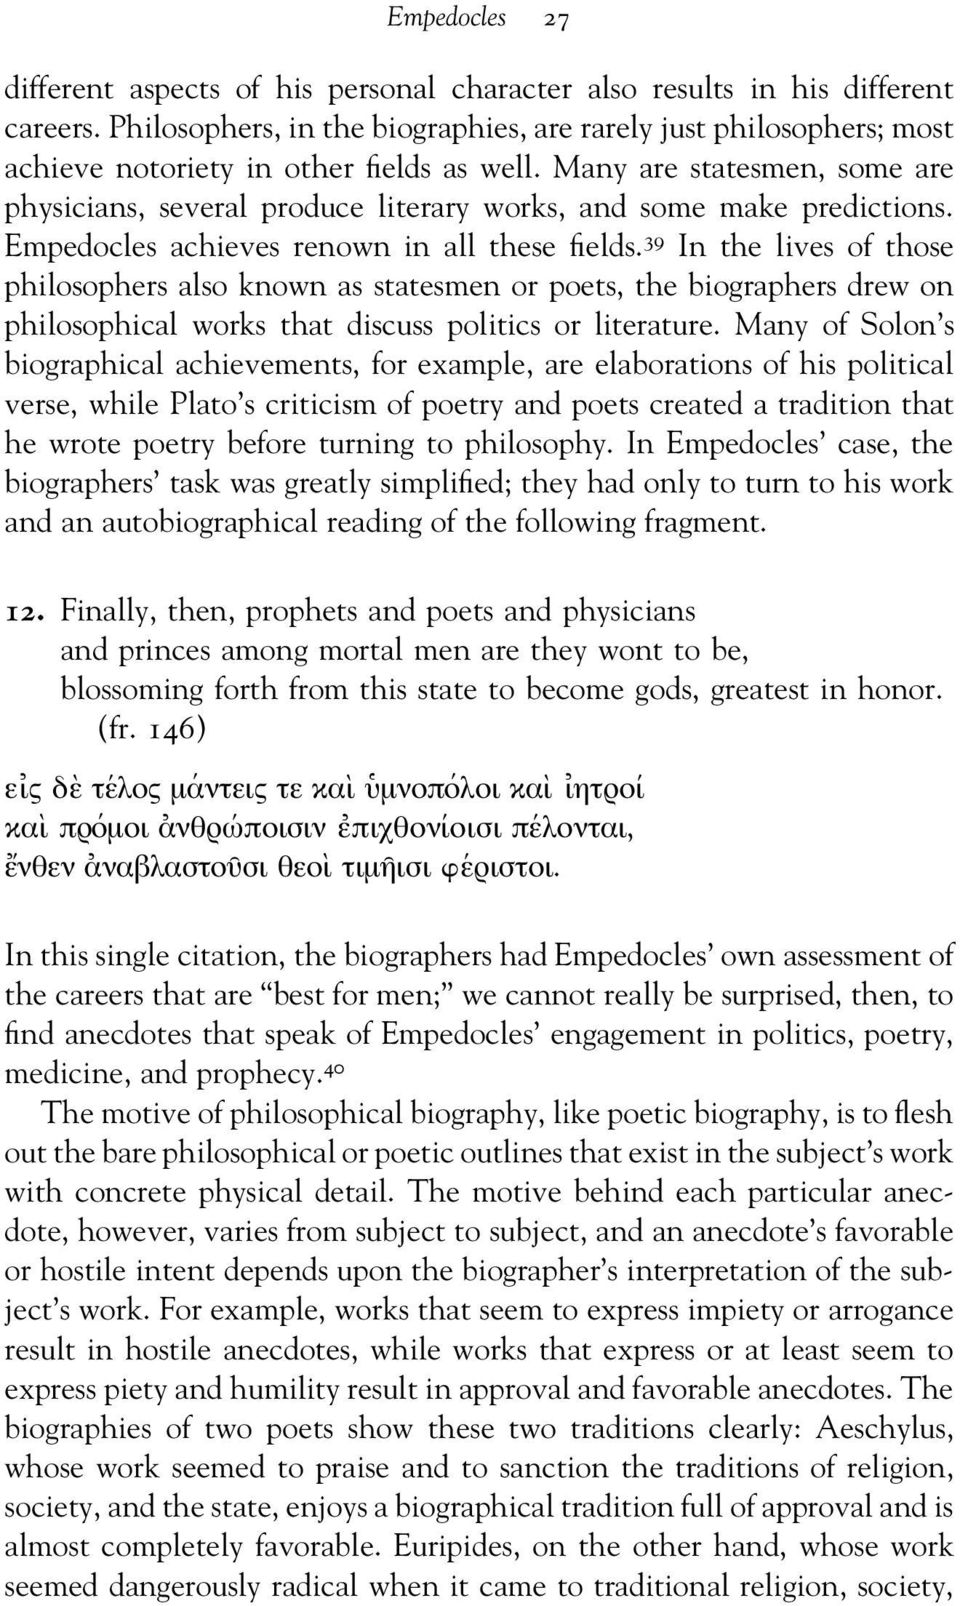 Many are statesmen, some are physicians, several produce literary works, and some make predictions. Empedocles achieves renown in all these fields.